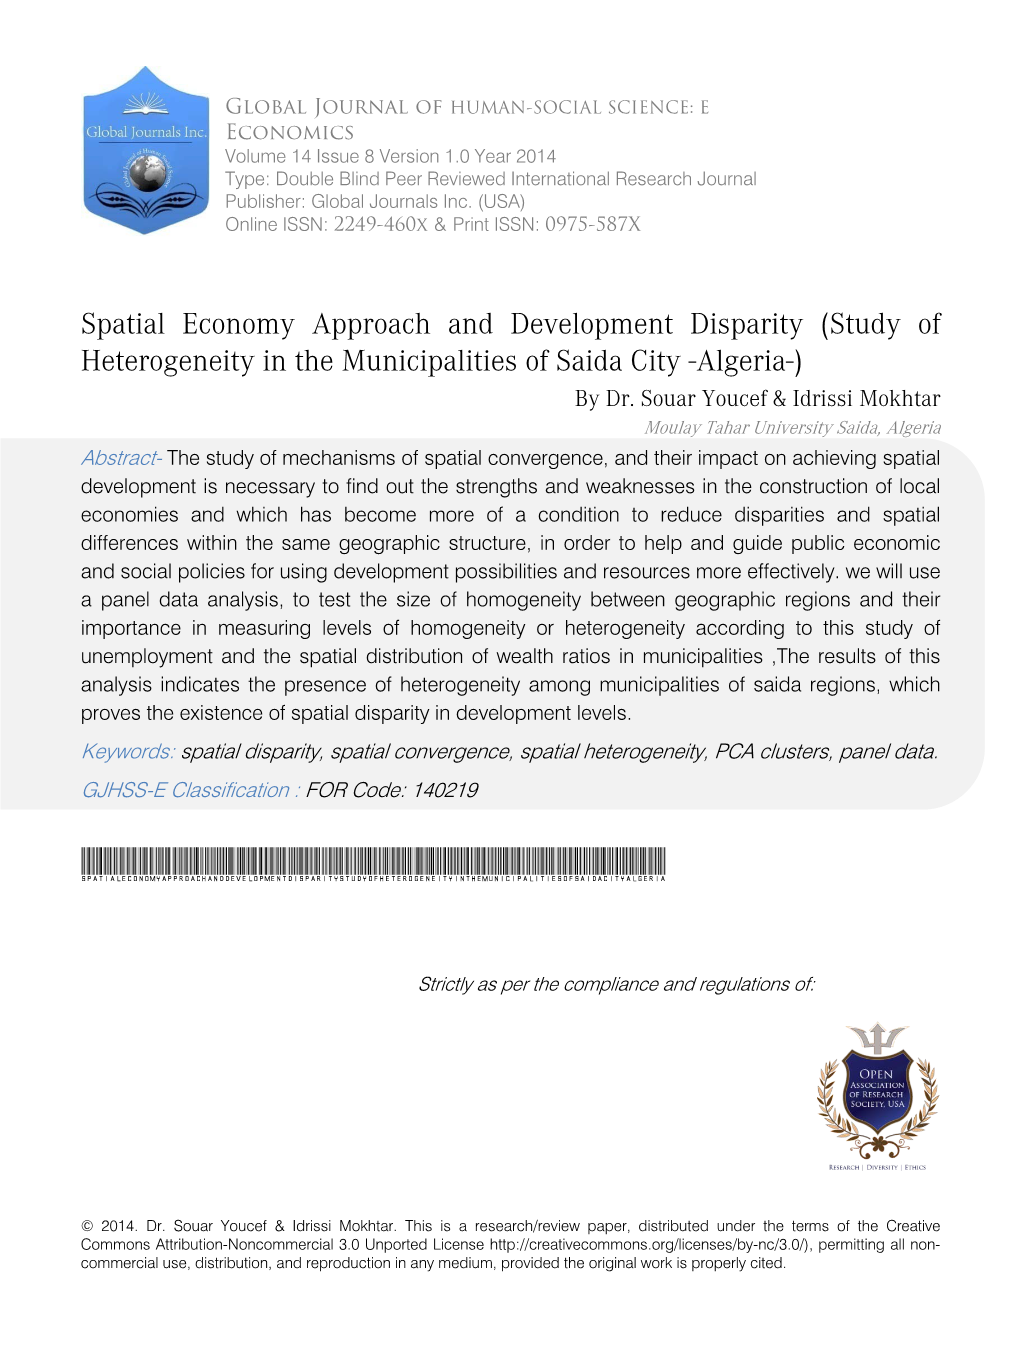 Spatial Economy Approach and Development Disparity (Study of Heterogeneity in the Municipalities of Saida City -Algeria-) by Dr